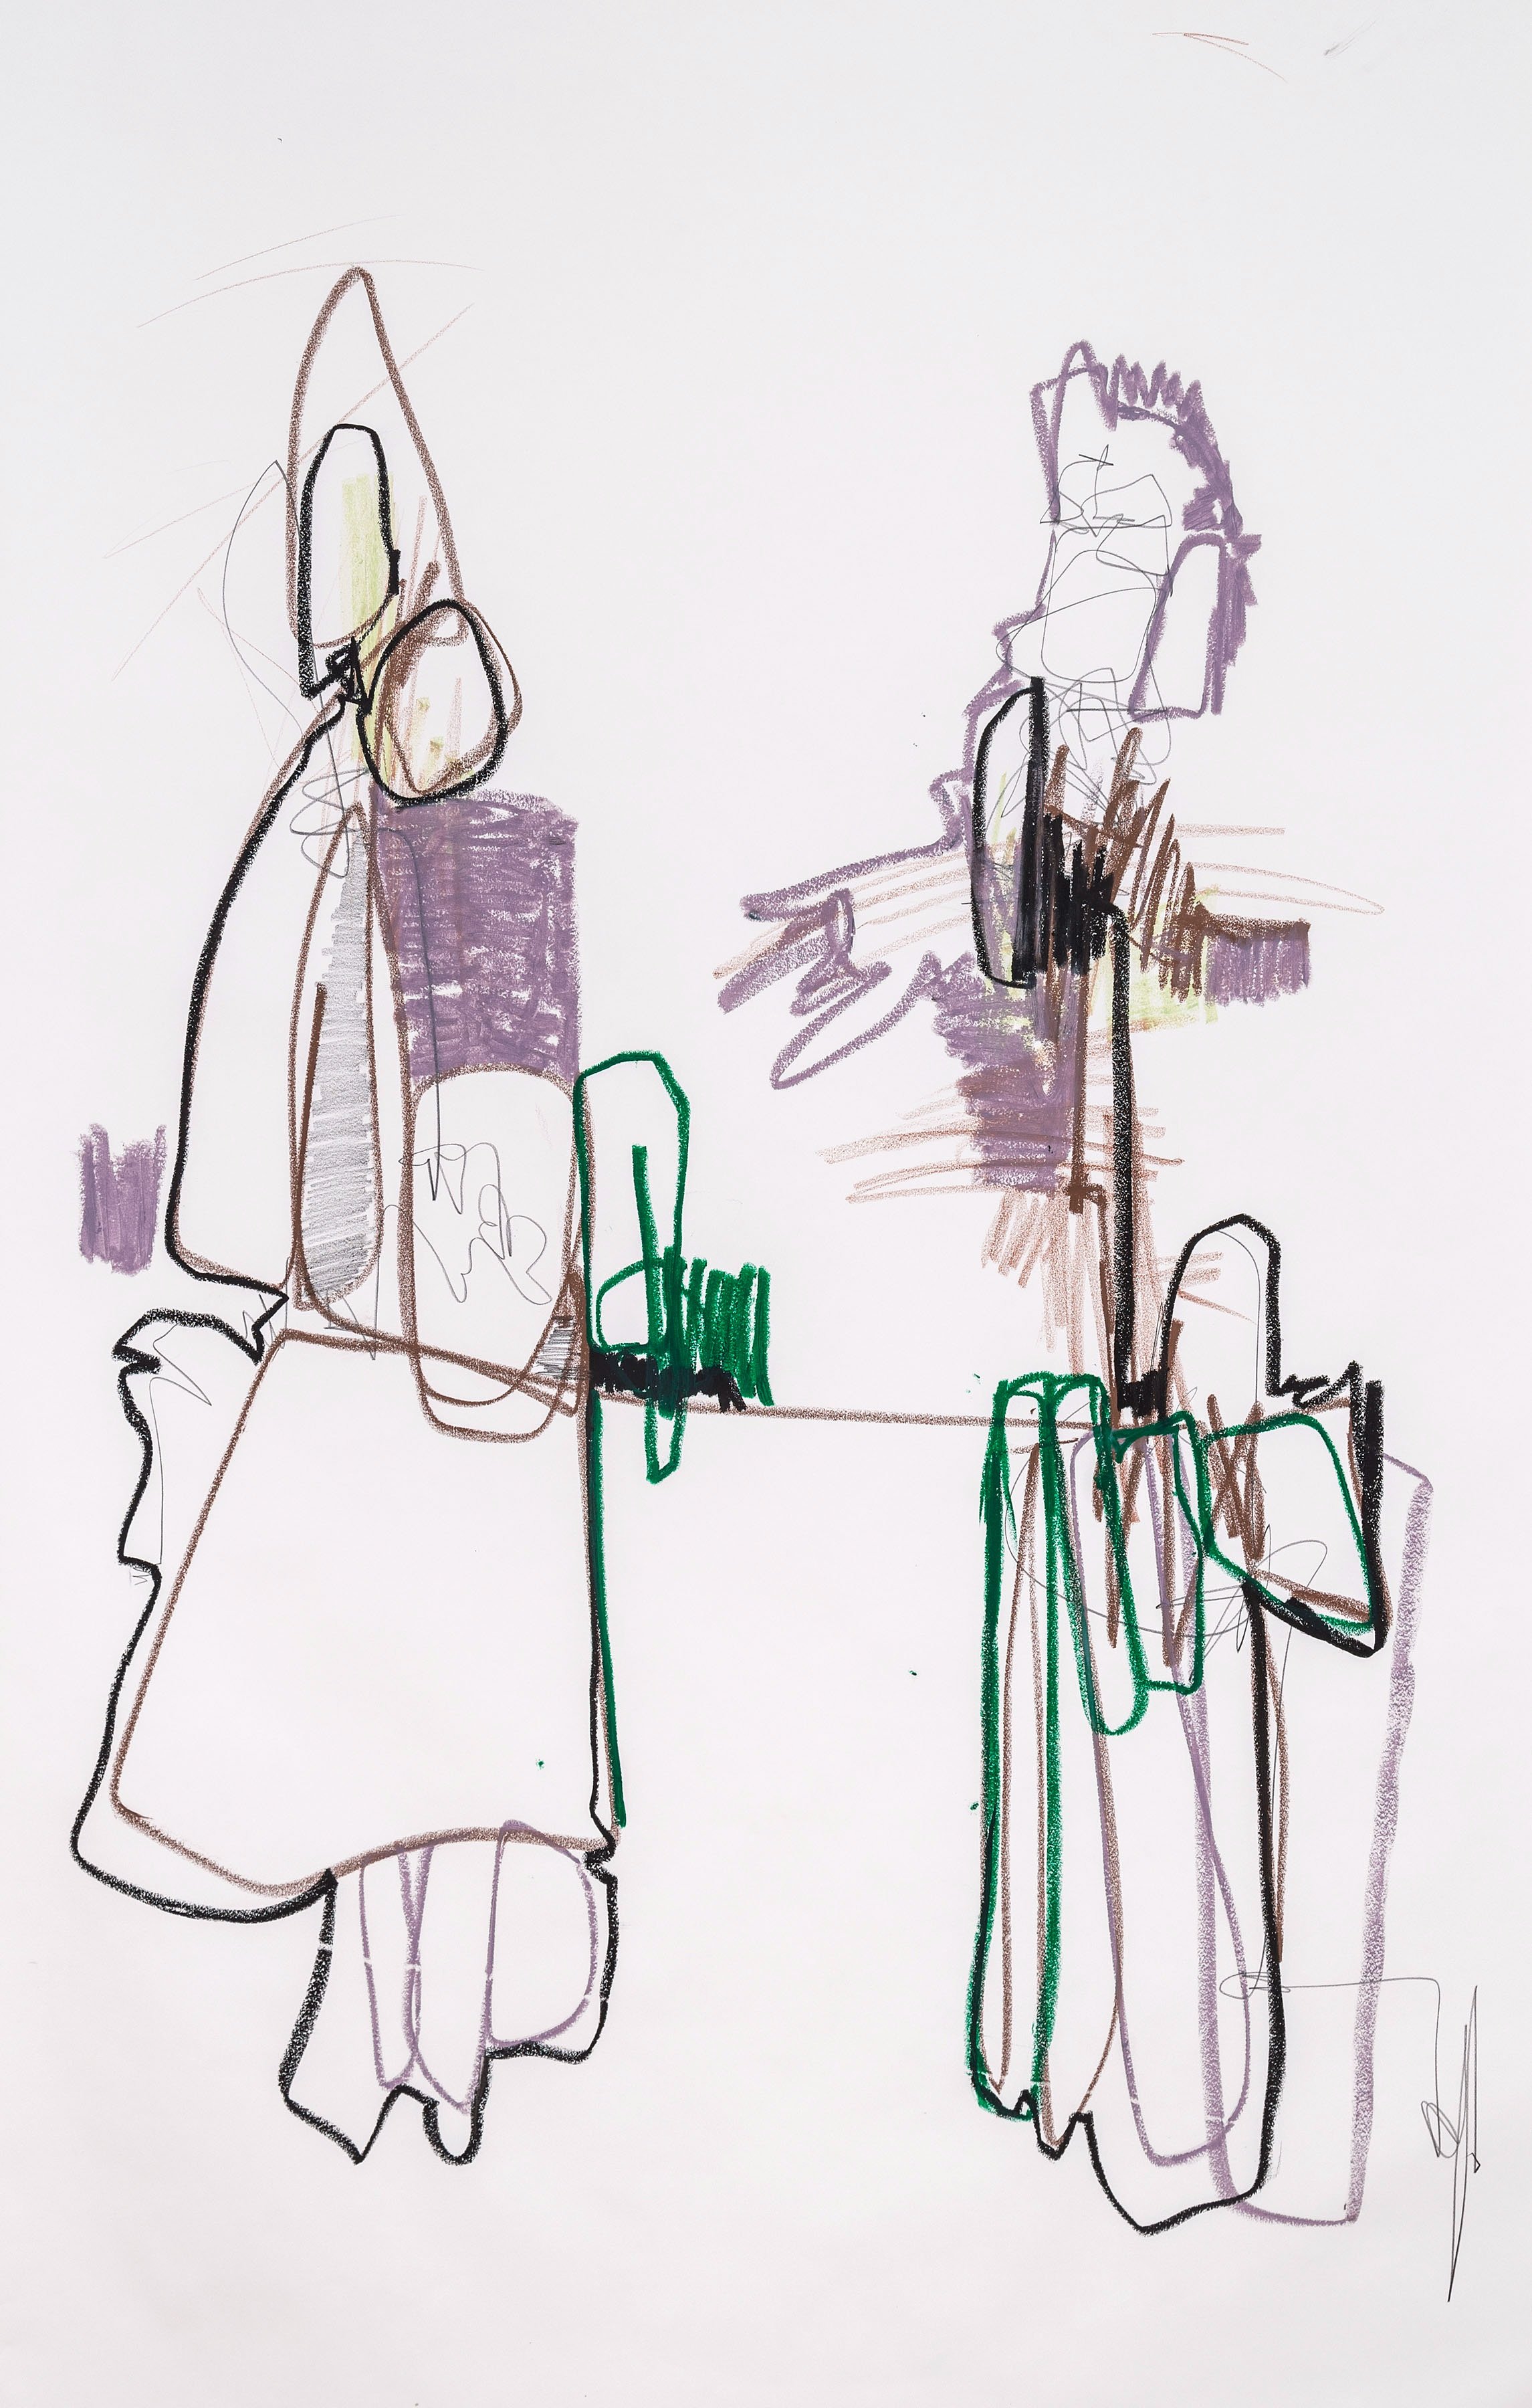   Connector,  Hook &amp; Eye Project - Mary Prescott, piano, 2012, oil stick, charcoal &amp; pencil on paper, 68x38" 